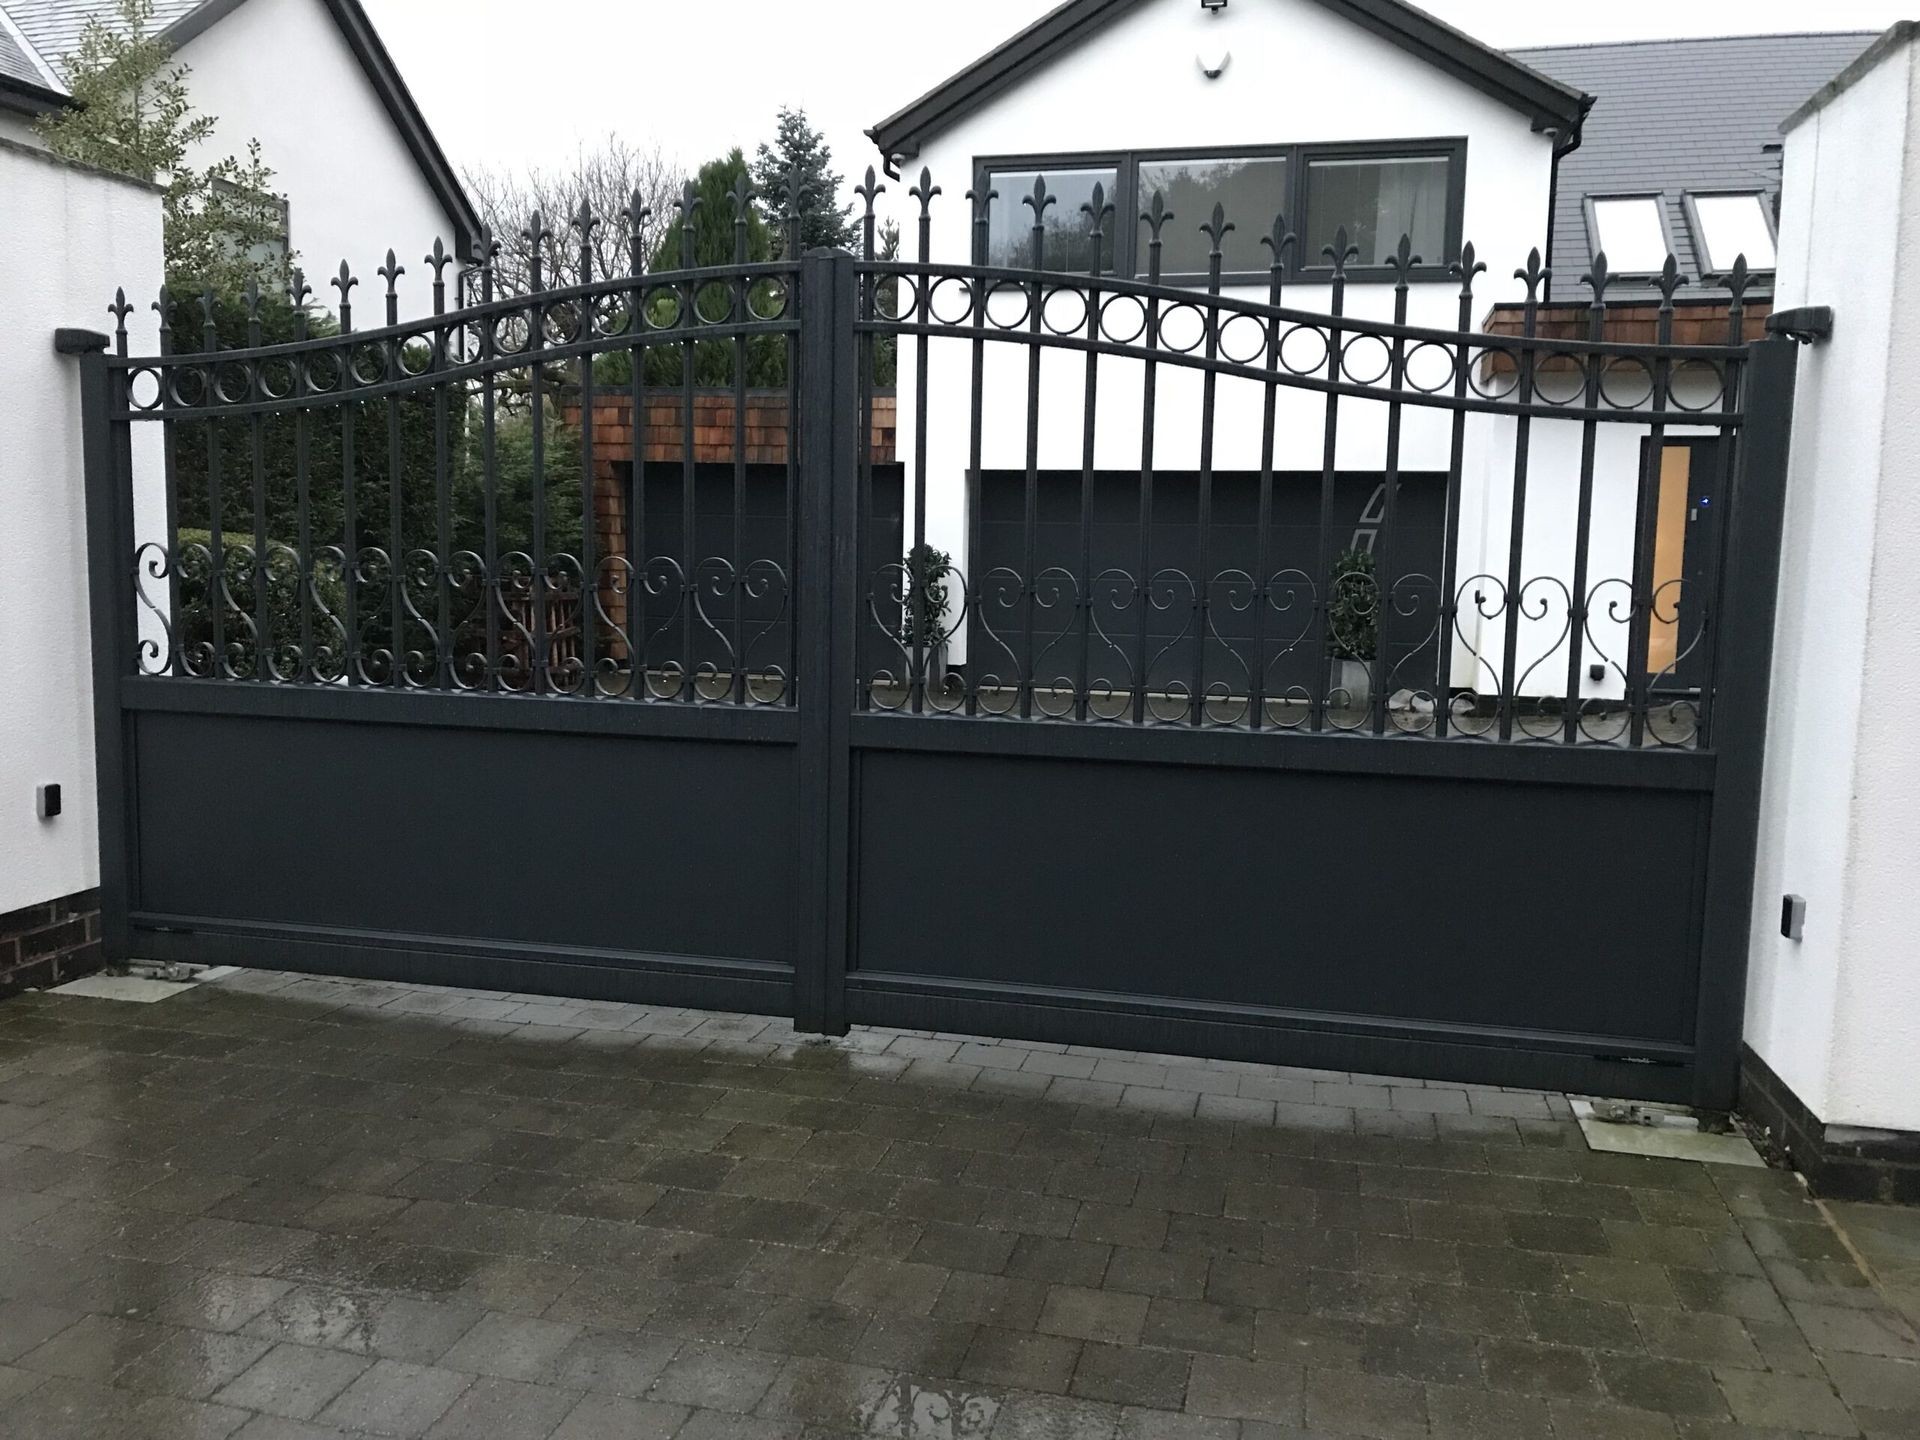 Expertise in Gate Installation: Your Security, Our Priority